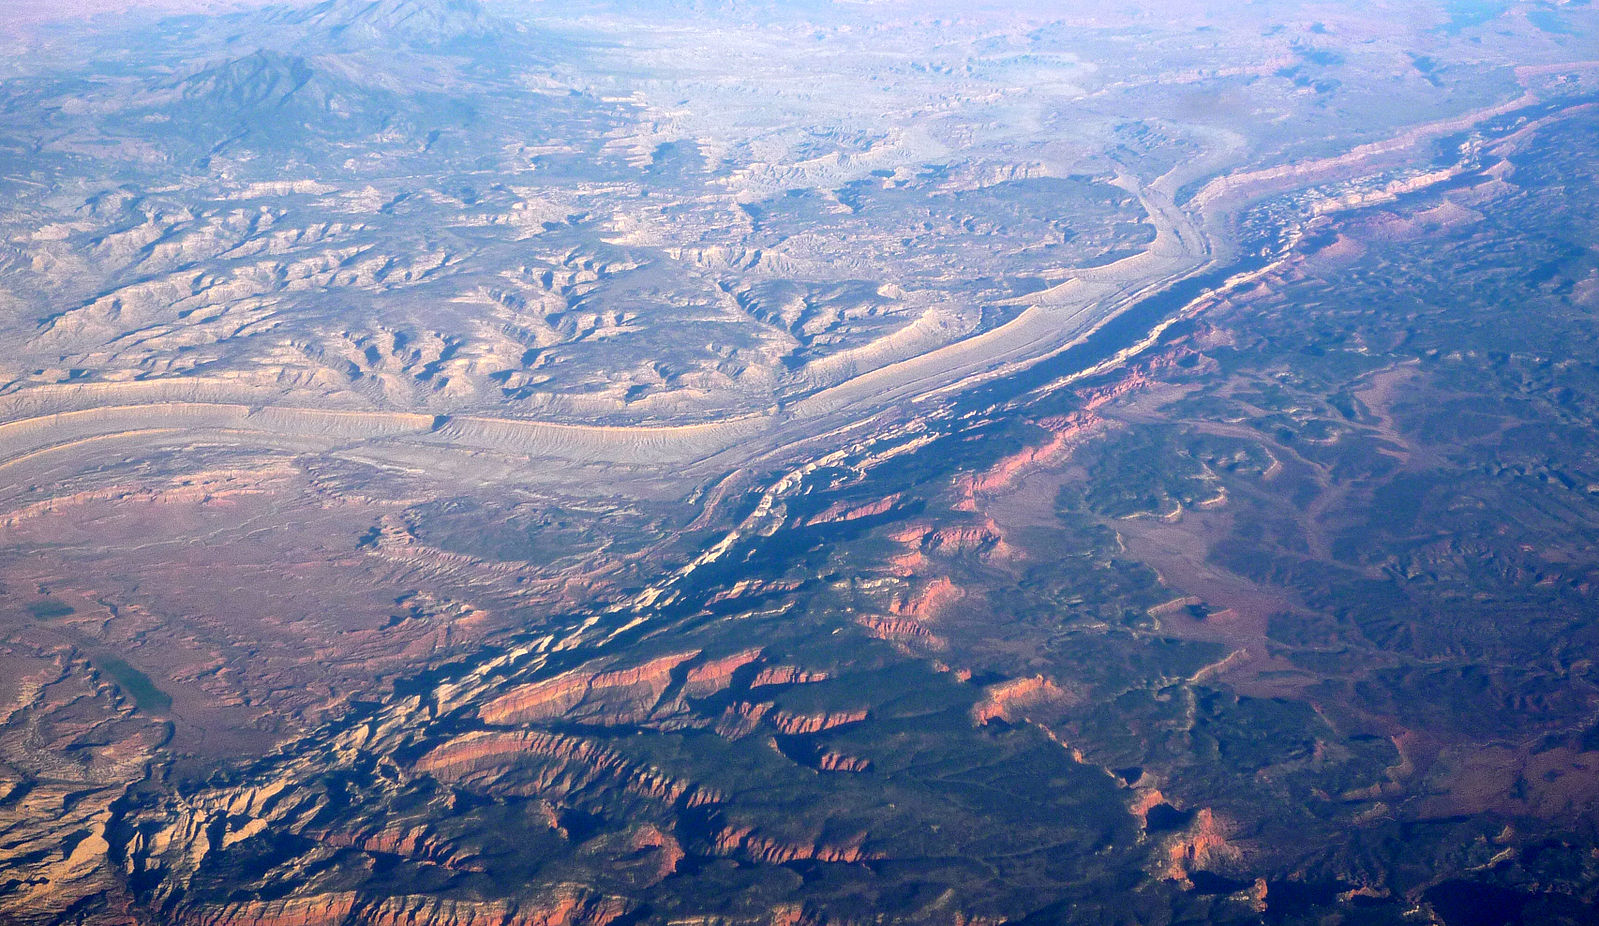 Aerial view of a long, thin whitish ridge that runs through the surrounding tan to brown landscape.